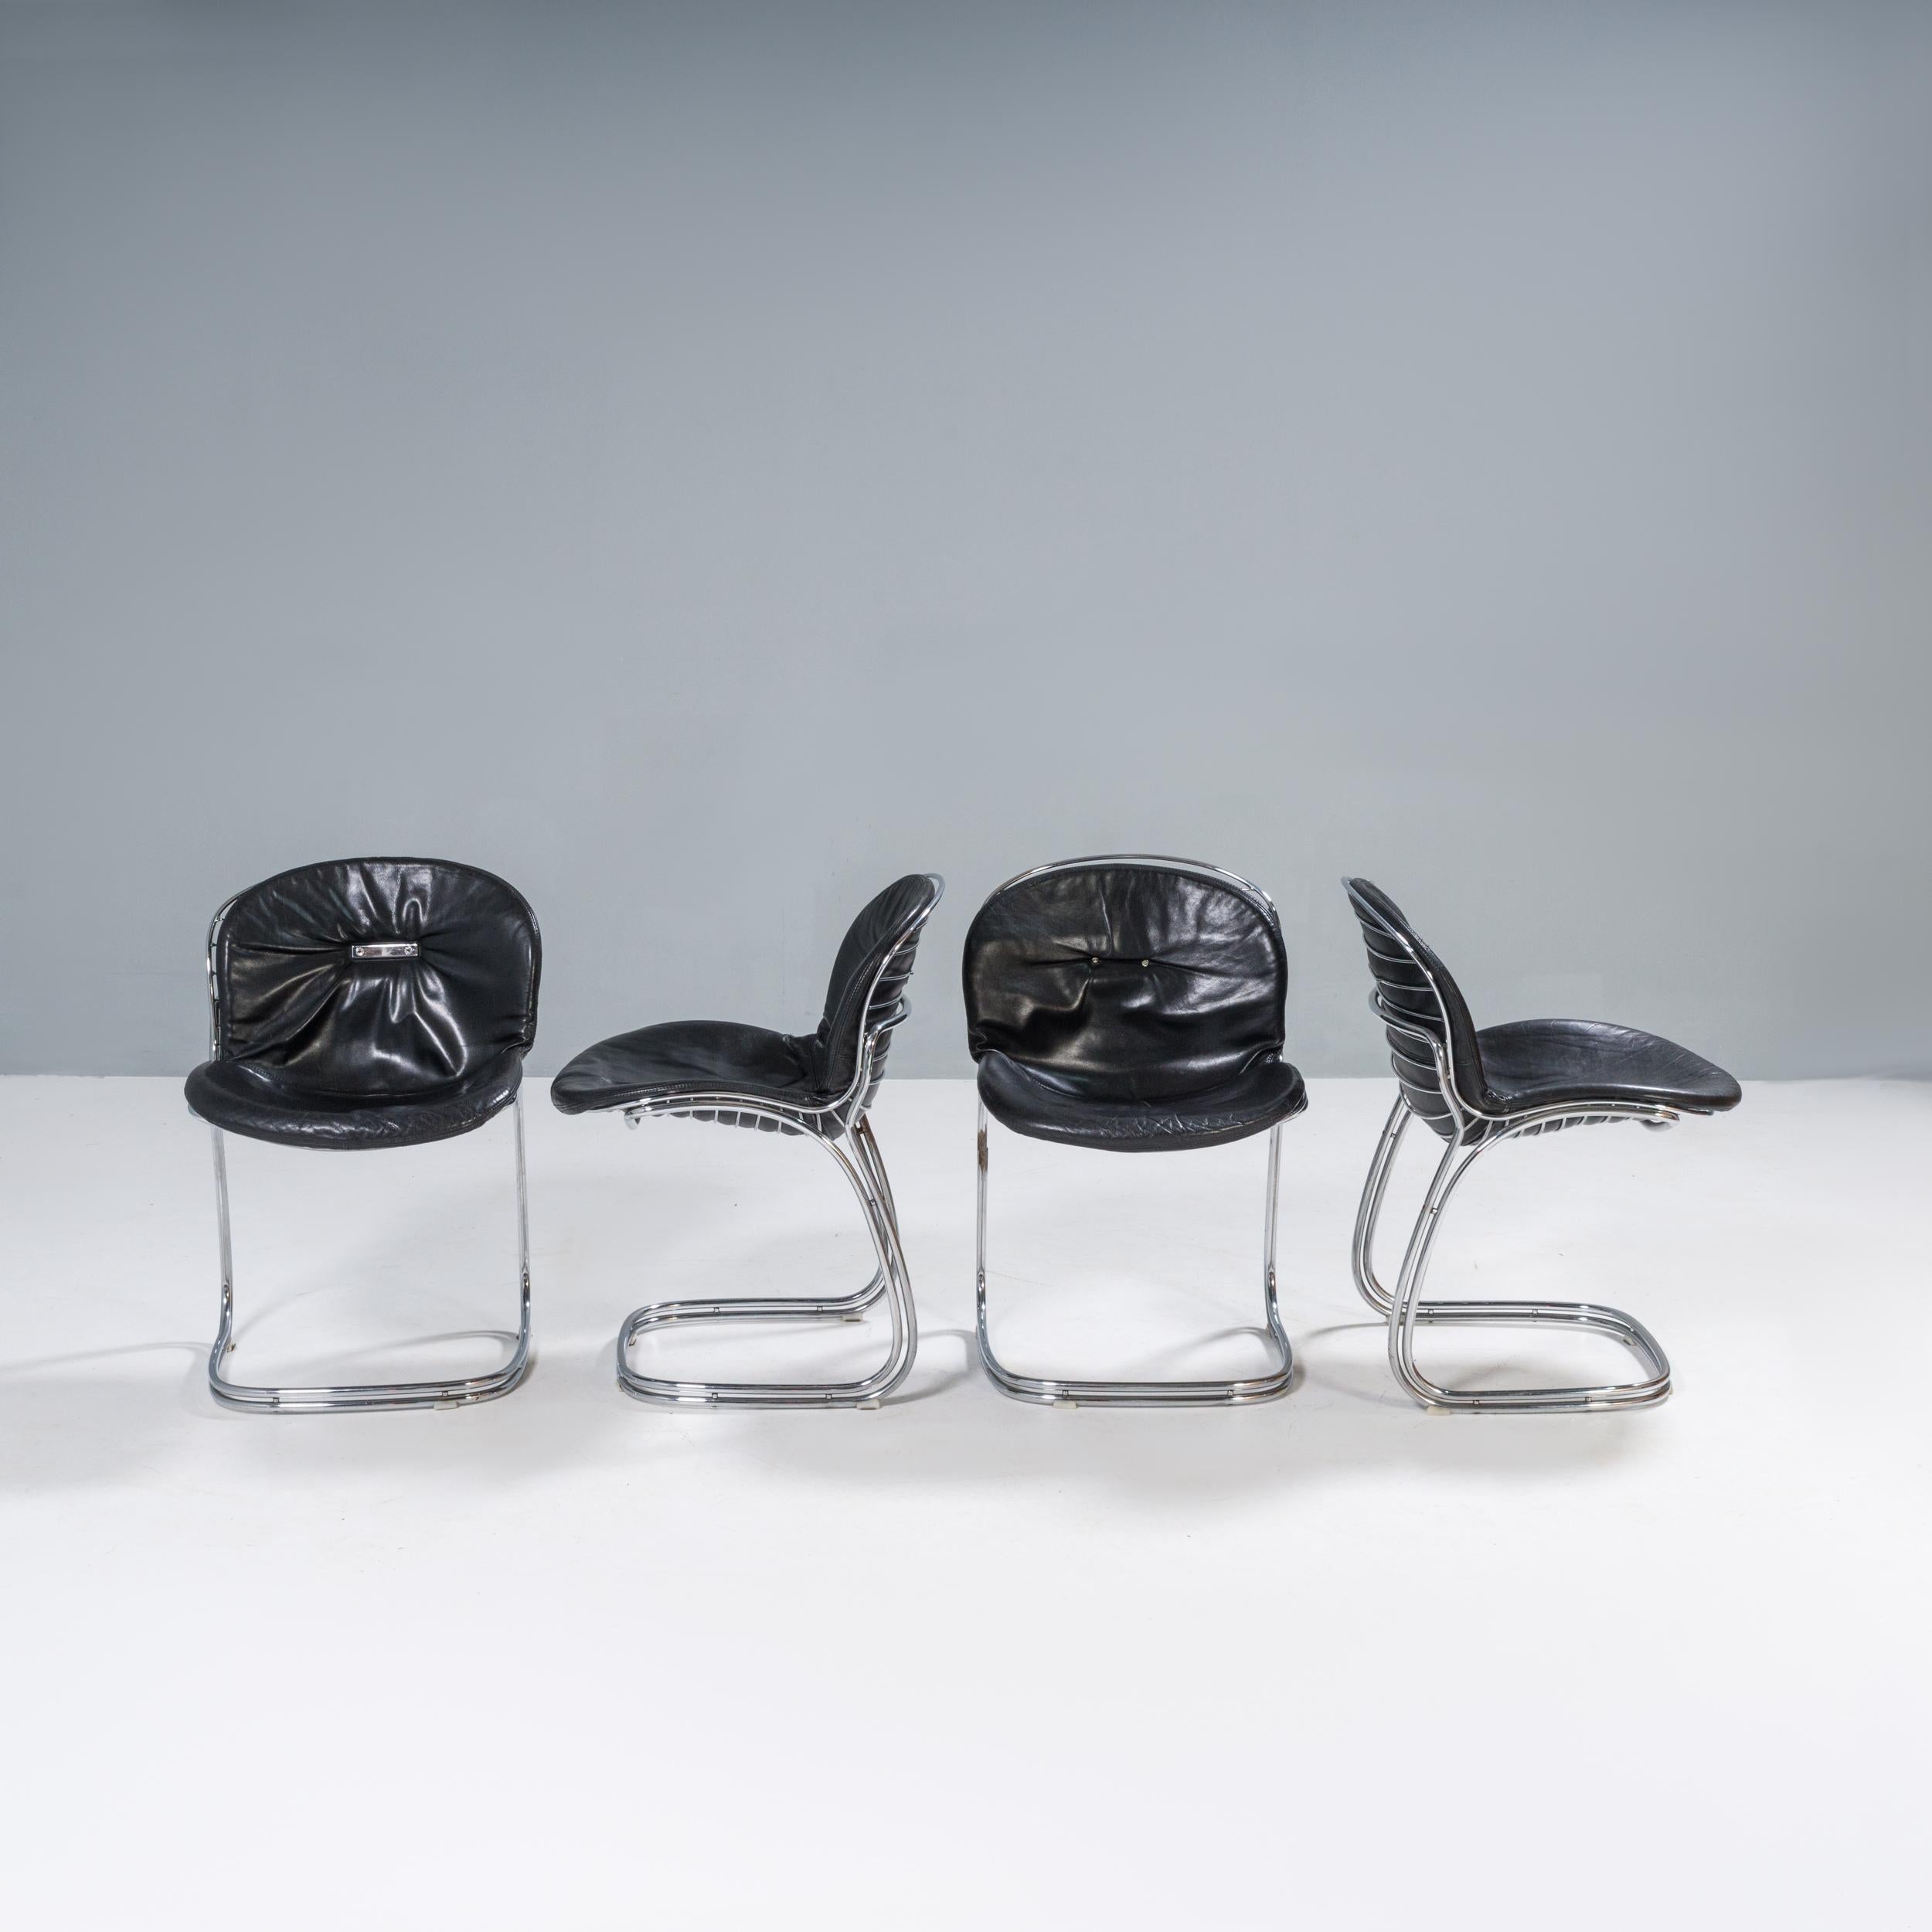 RIMA was founded in 1920, specialising in manufacturing metal furniture and Gastone Rinaldi took over the company from his father in 1948 becoming the designer. Many of his designs remain iconic pieces today including the Sabrina chairs from the